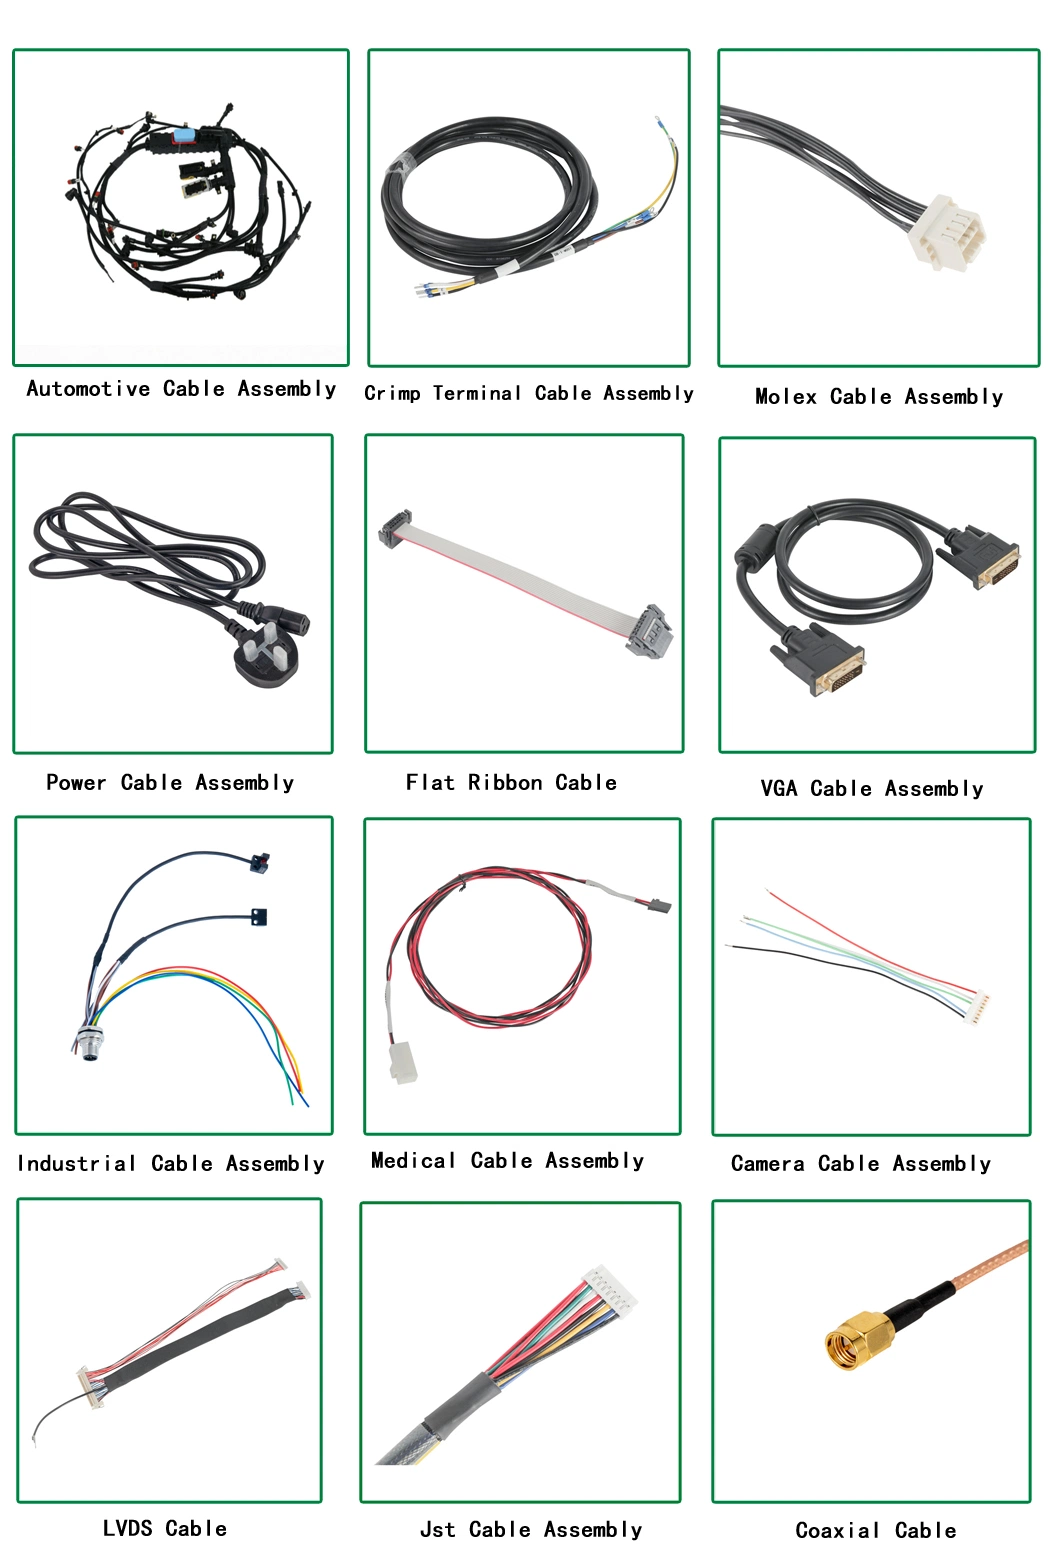 Custom Automotive Wire Harness Assembly Lvds Cable for Monitor